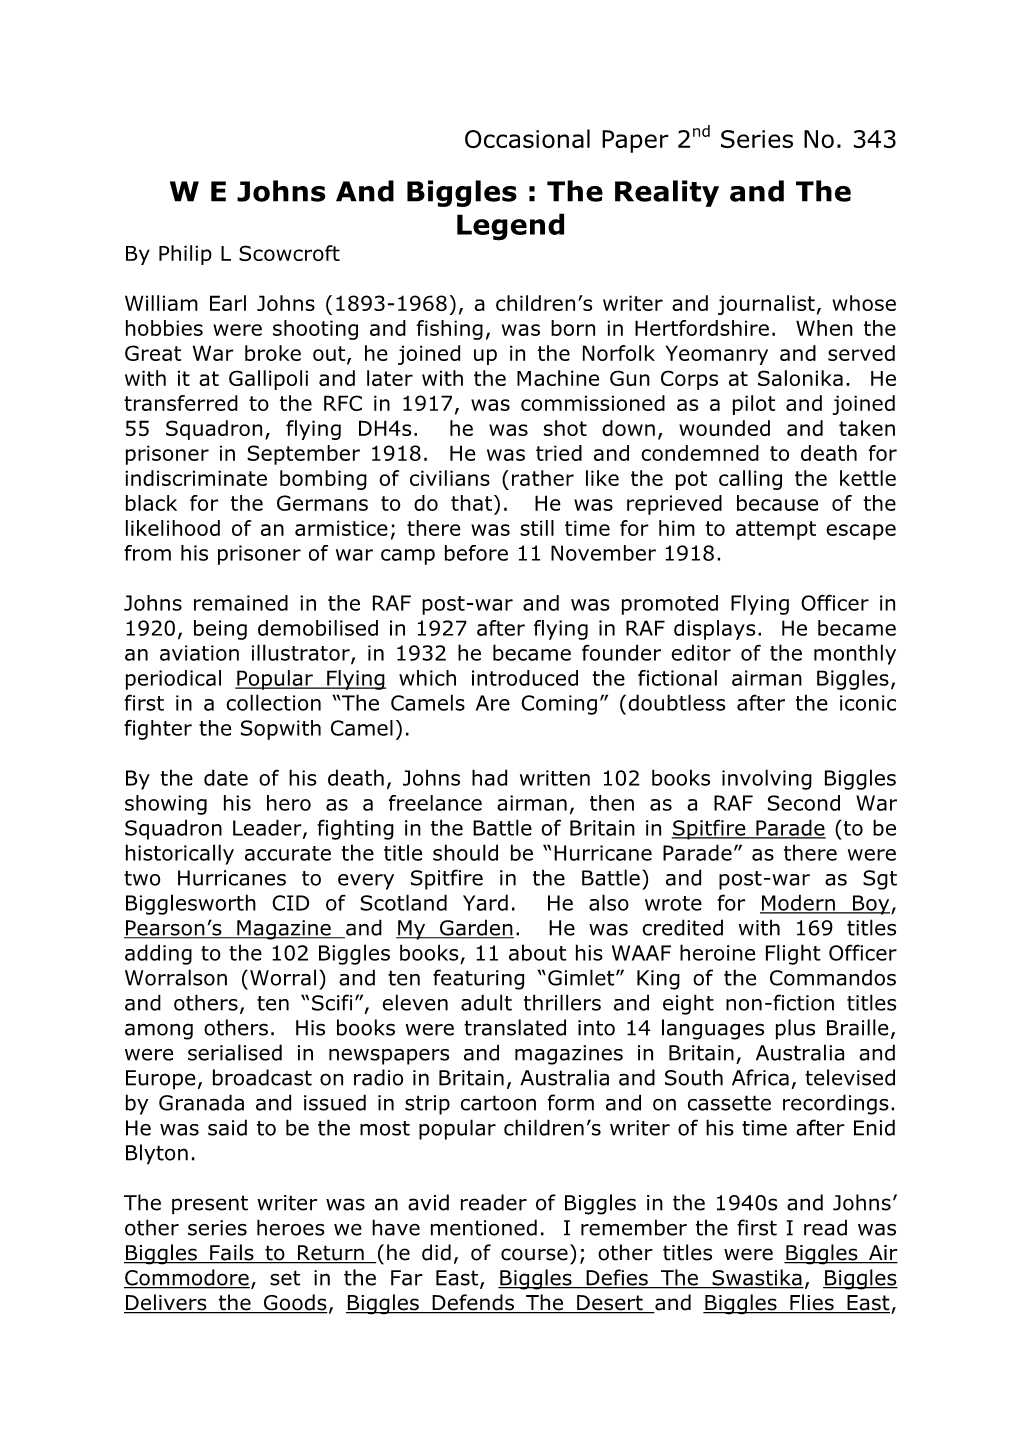 W E Johns and Biggles : the Reality and the Legend by Philip L Scowcroft